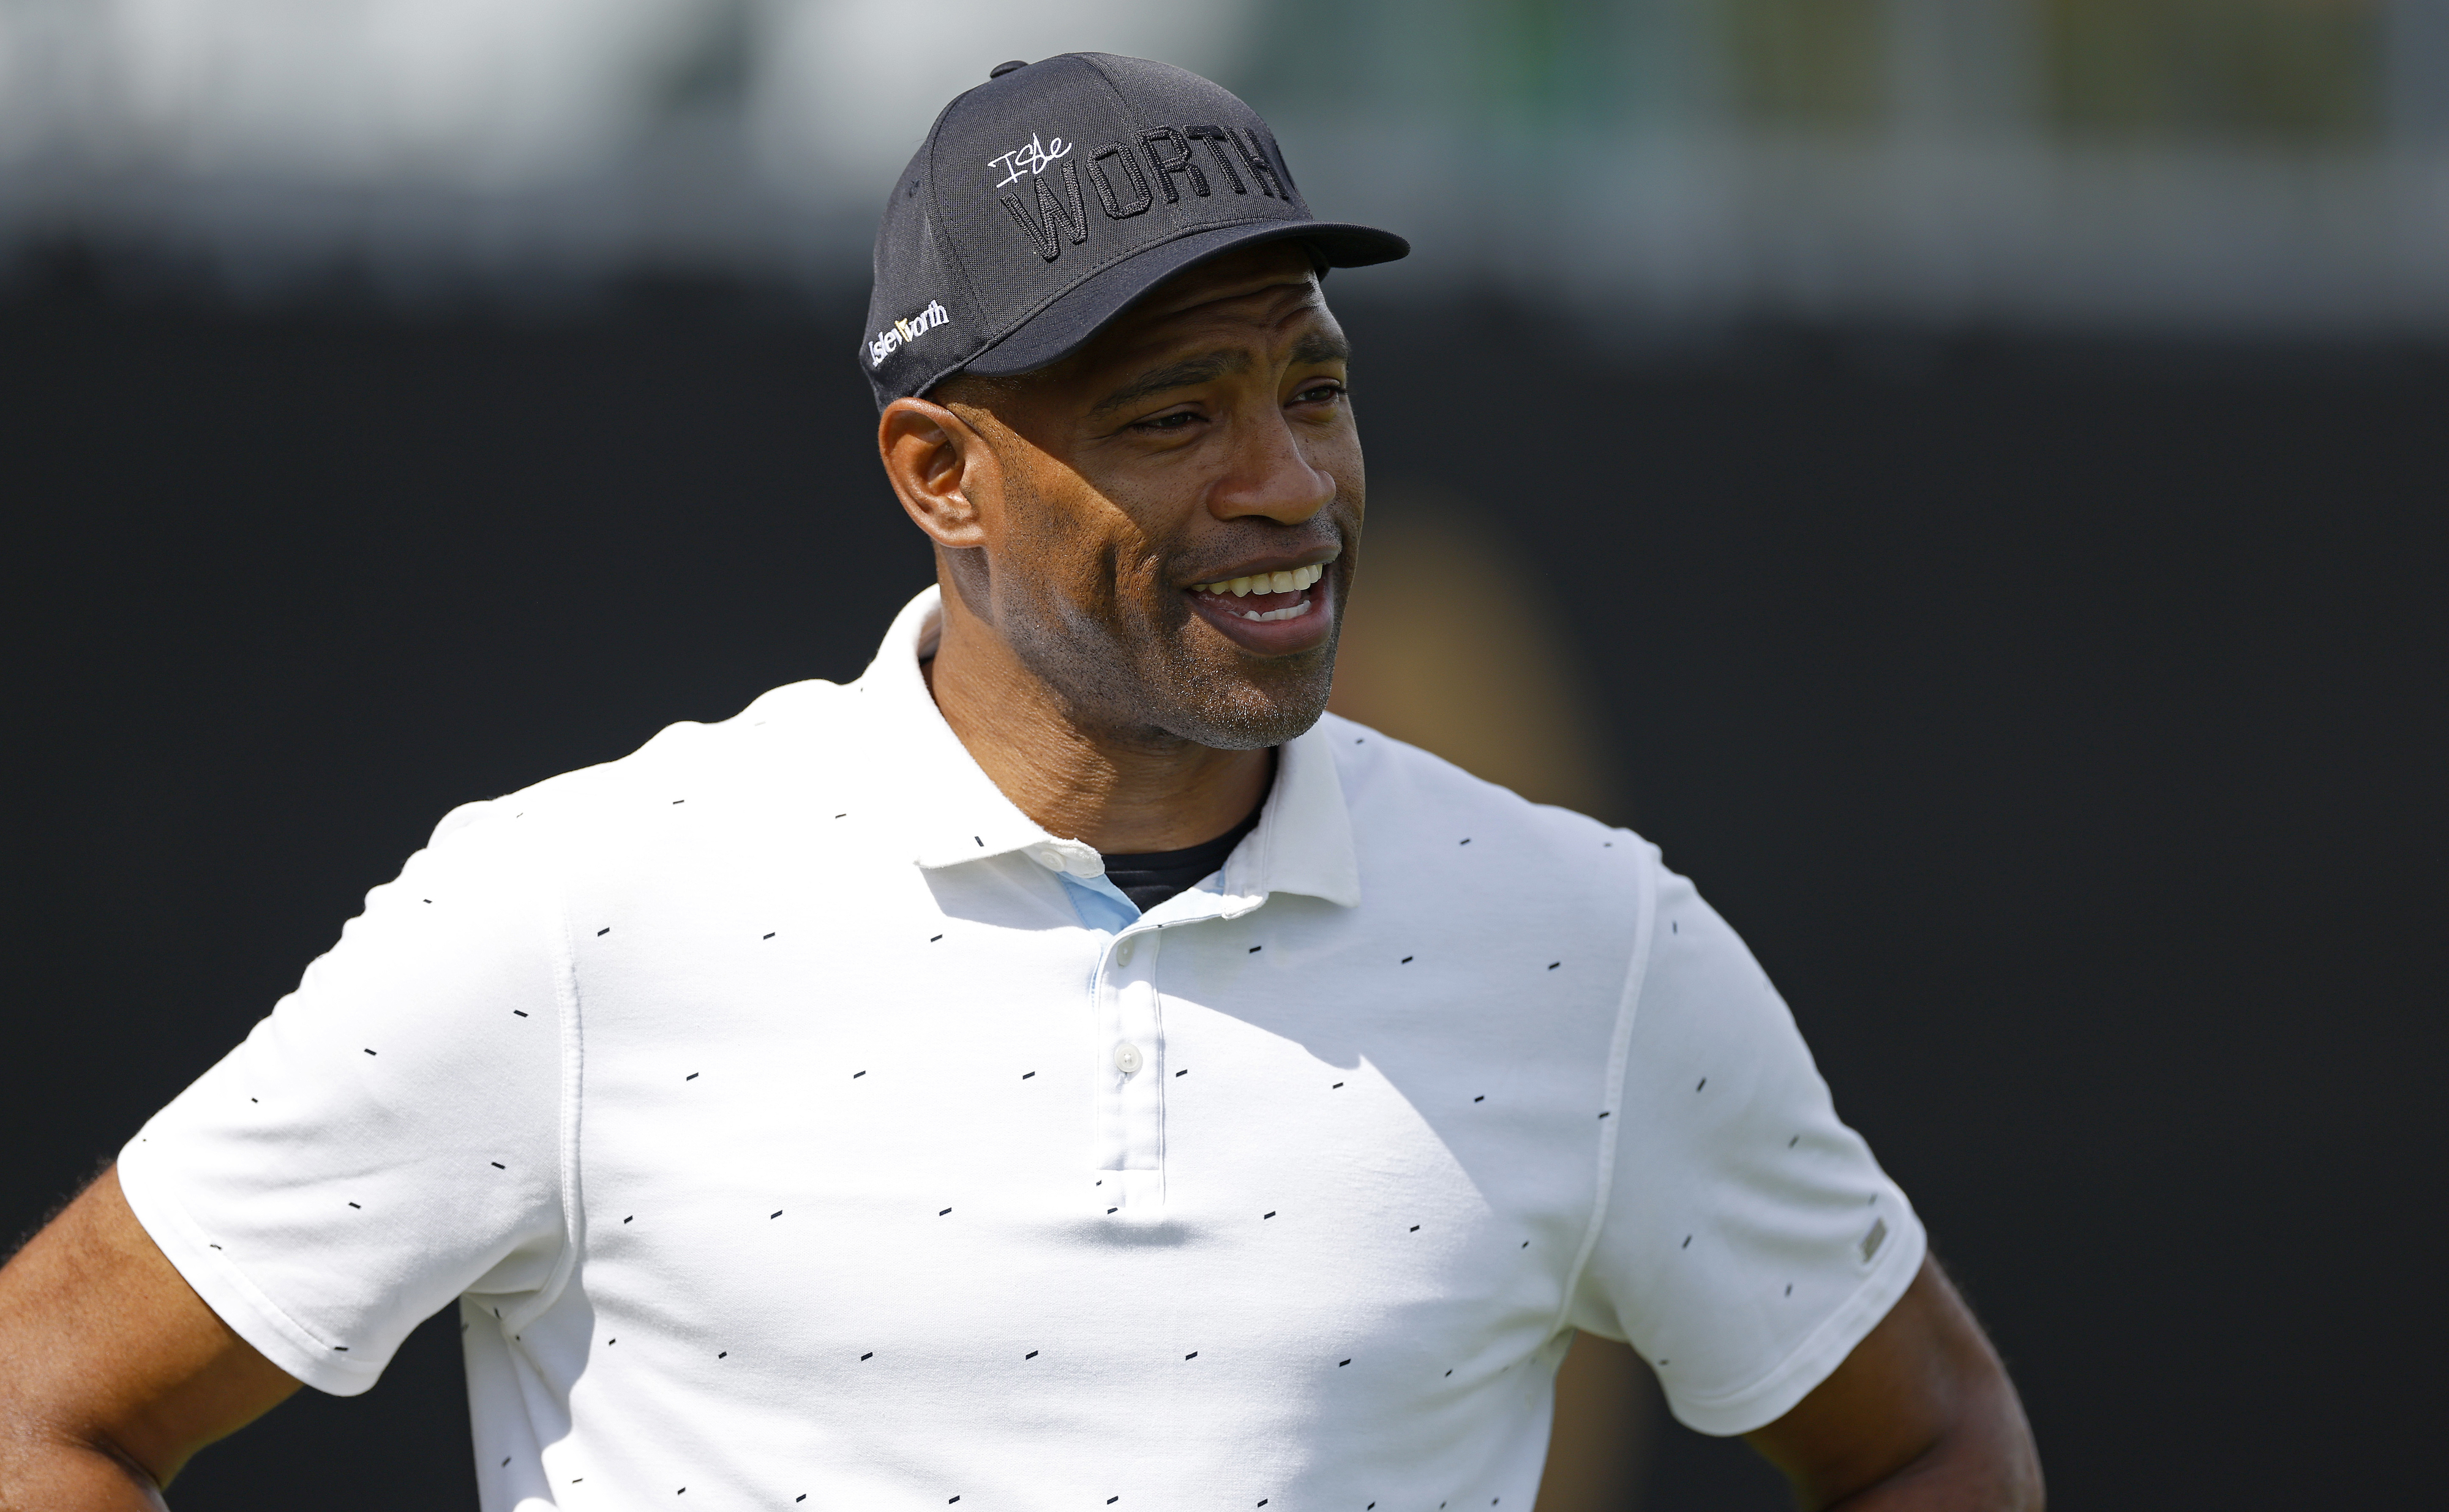 Smiling athlete in a polo shirt and cap on a golf course